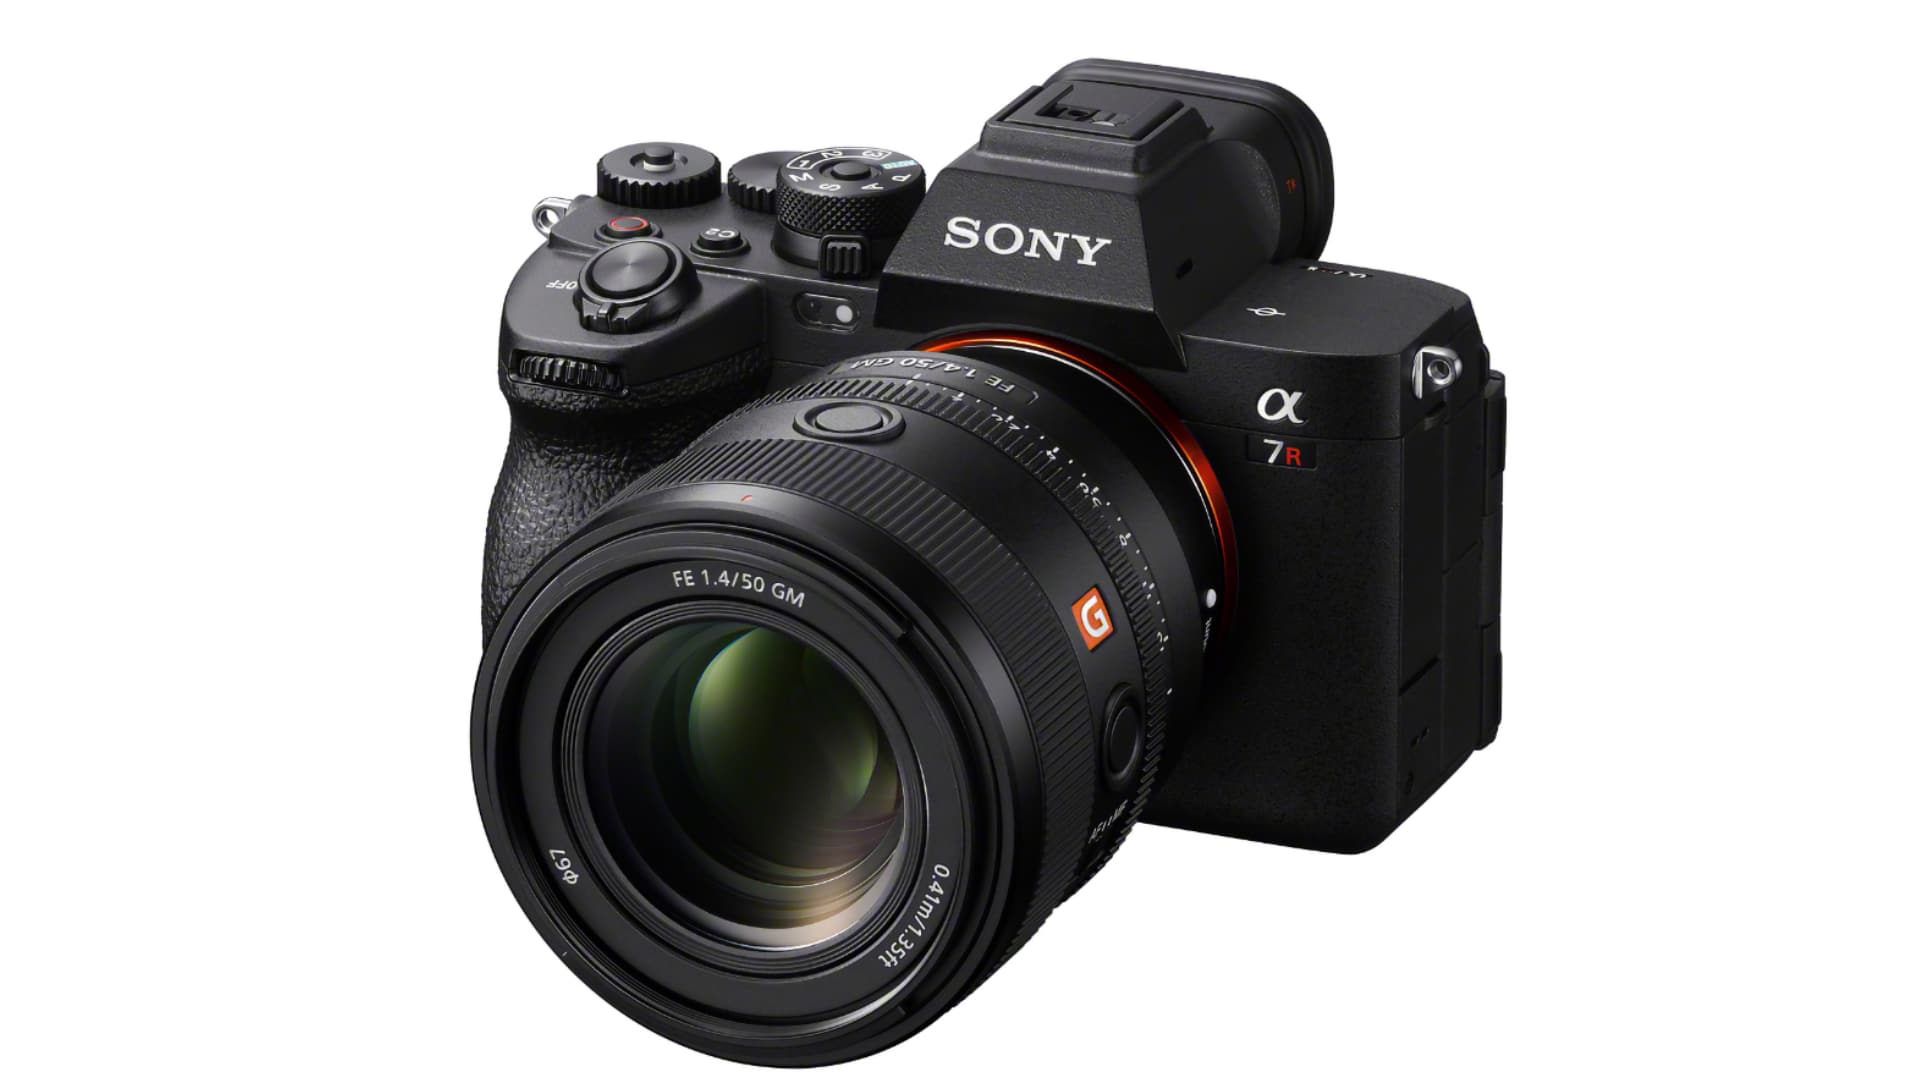 Mount the FE 50MM F1.4 GM on a Sony Alpha camera to unlock breathing compensation and more